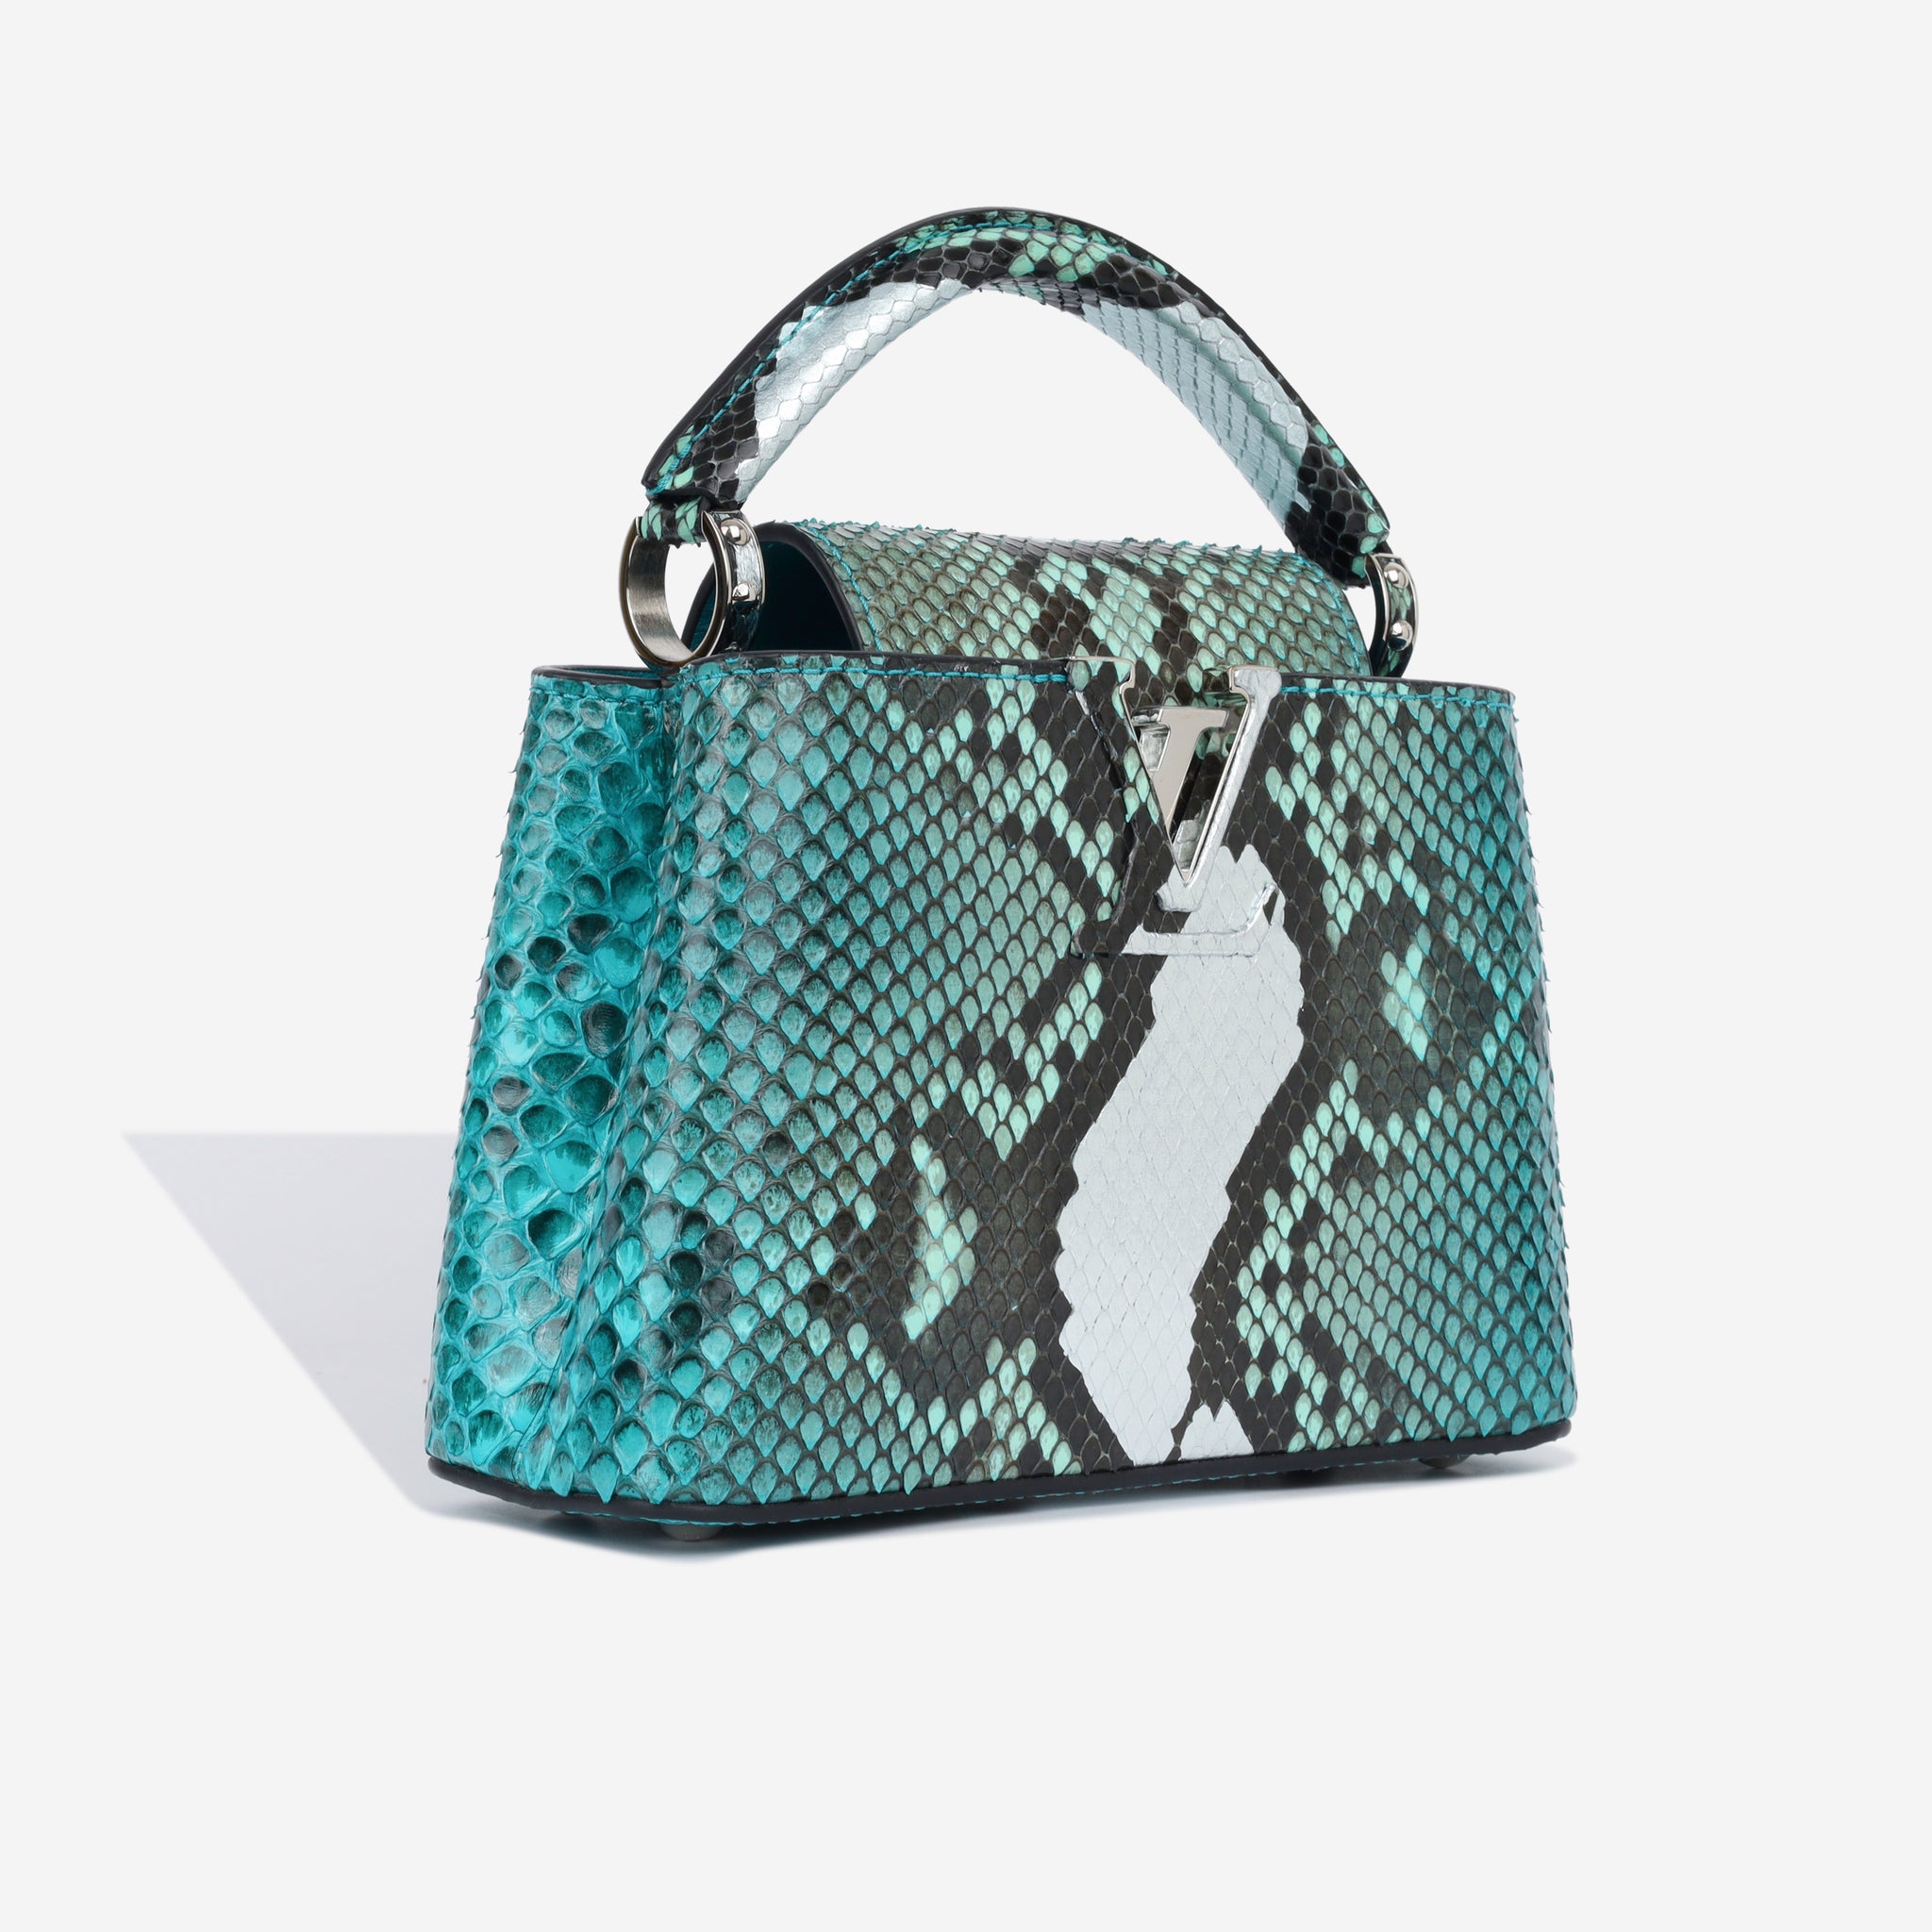 Products by Louis Vuitton: Capucines Mini Bag